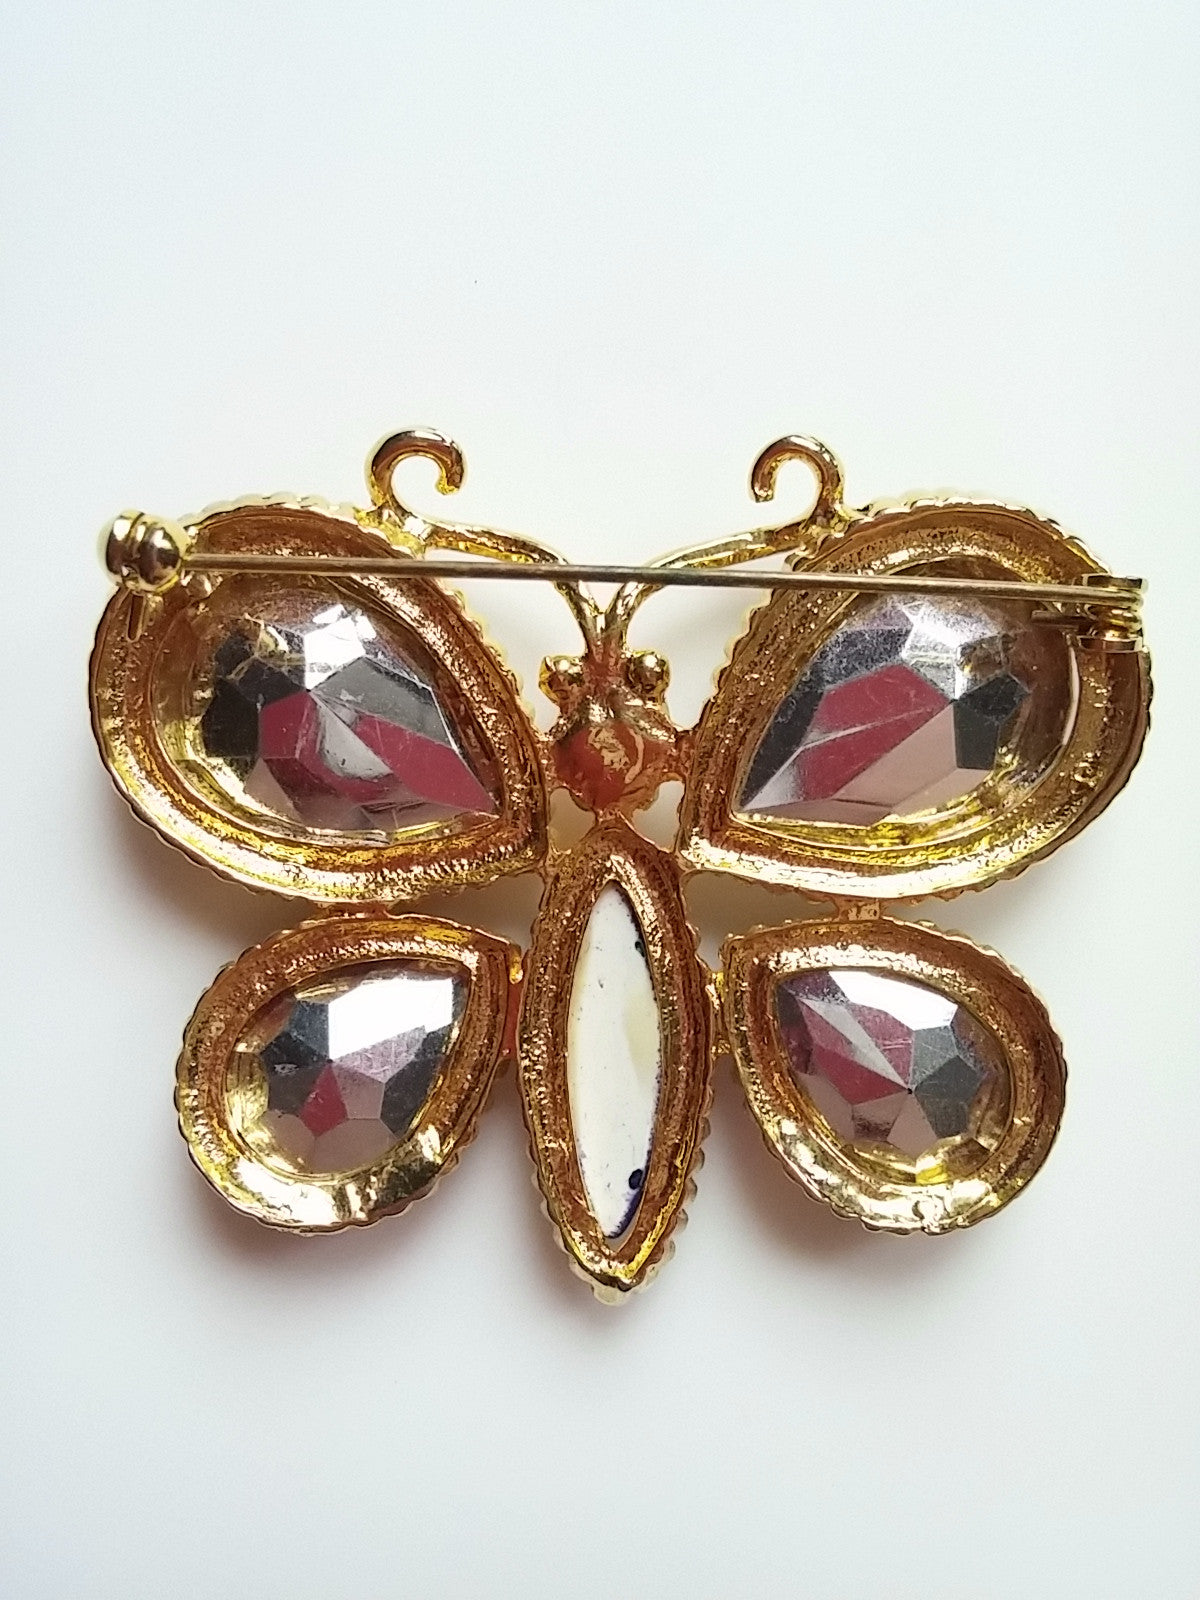 Vintage Brooch- Large Gold Tone Butterfly w/ Jewel Colored Plastic Accent - Dirty 30 Vintage